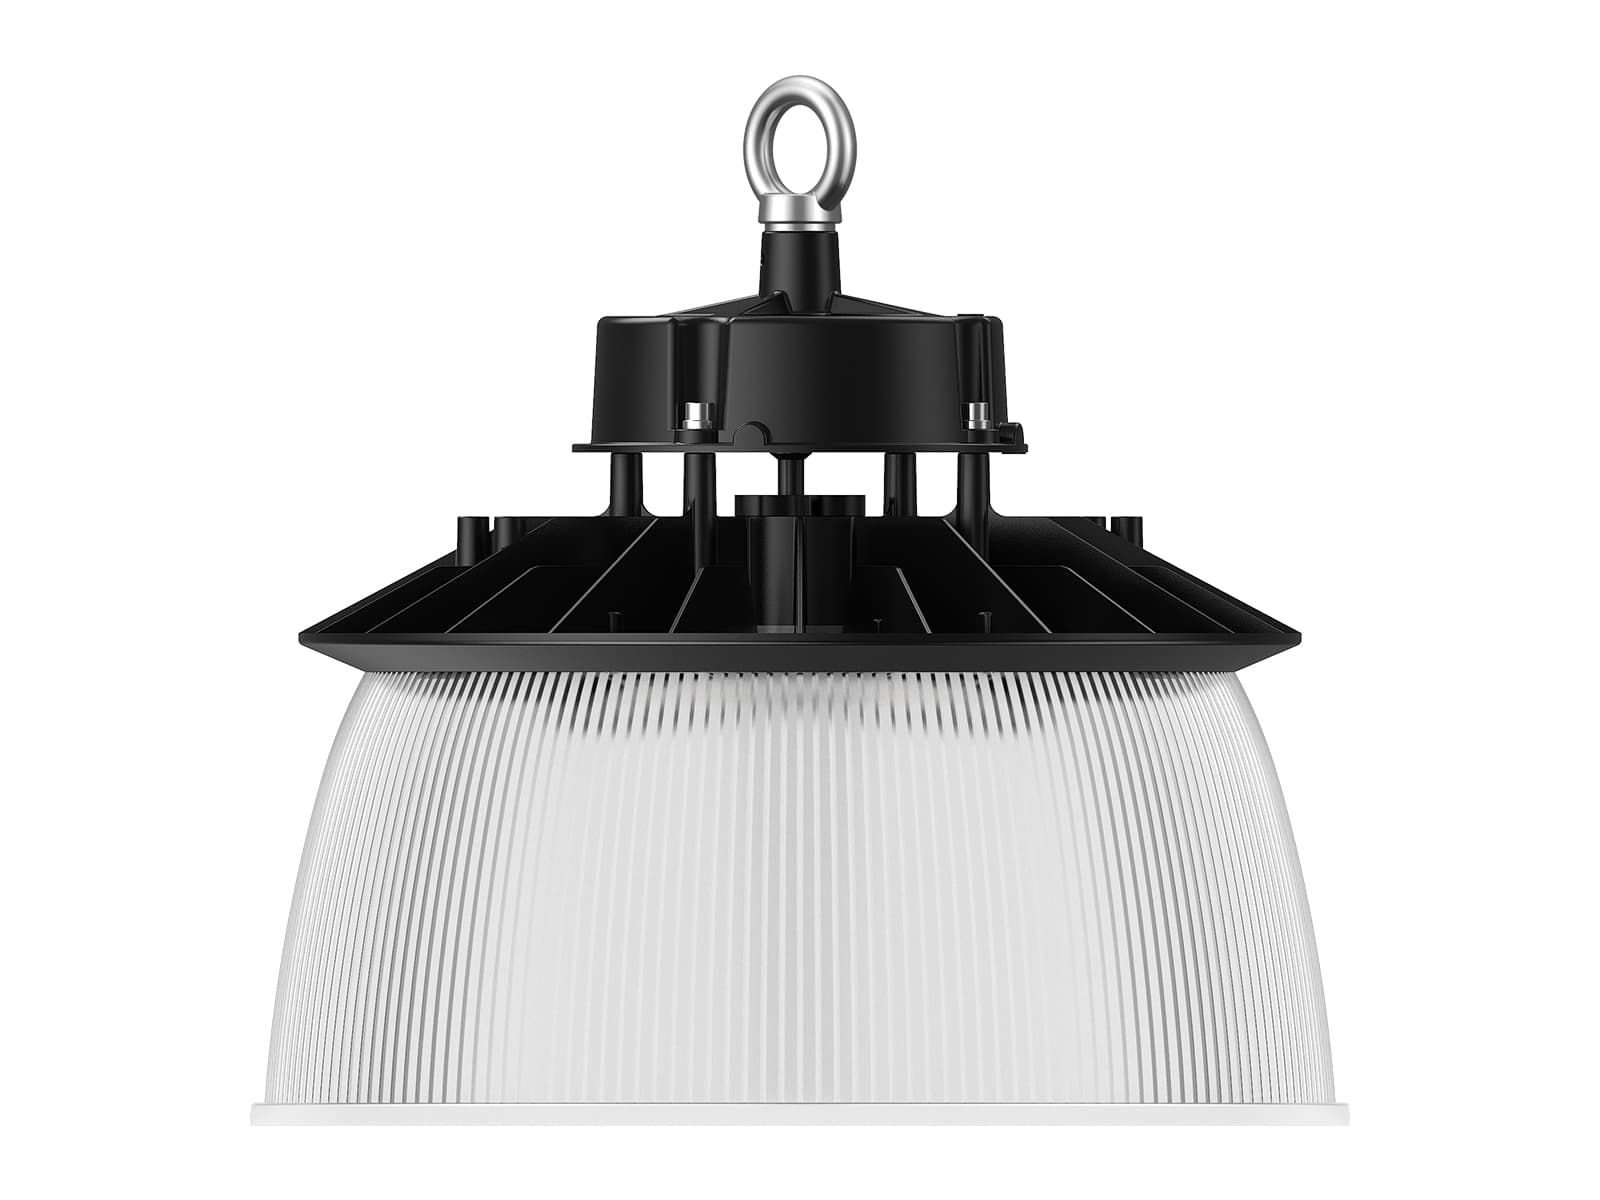 HB73 LED High Bay Light with PC and ALU reflector